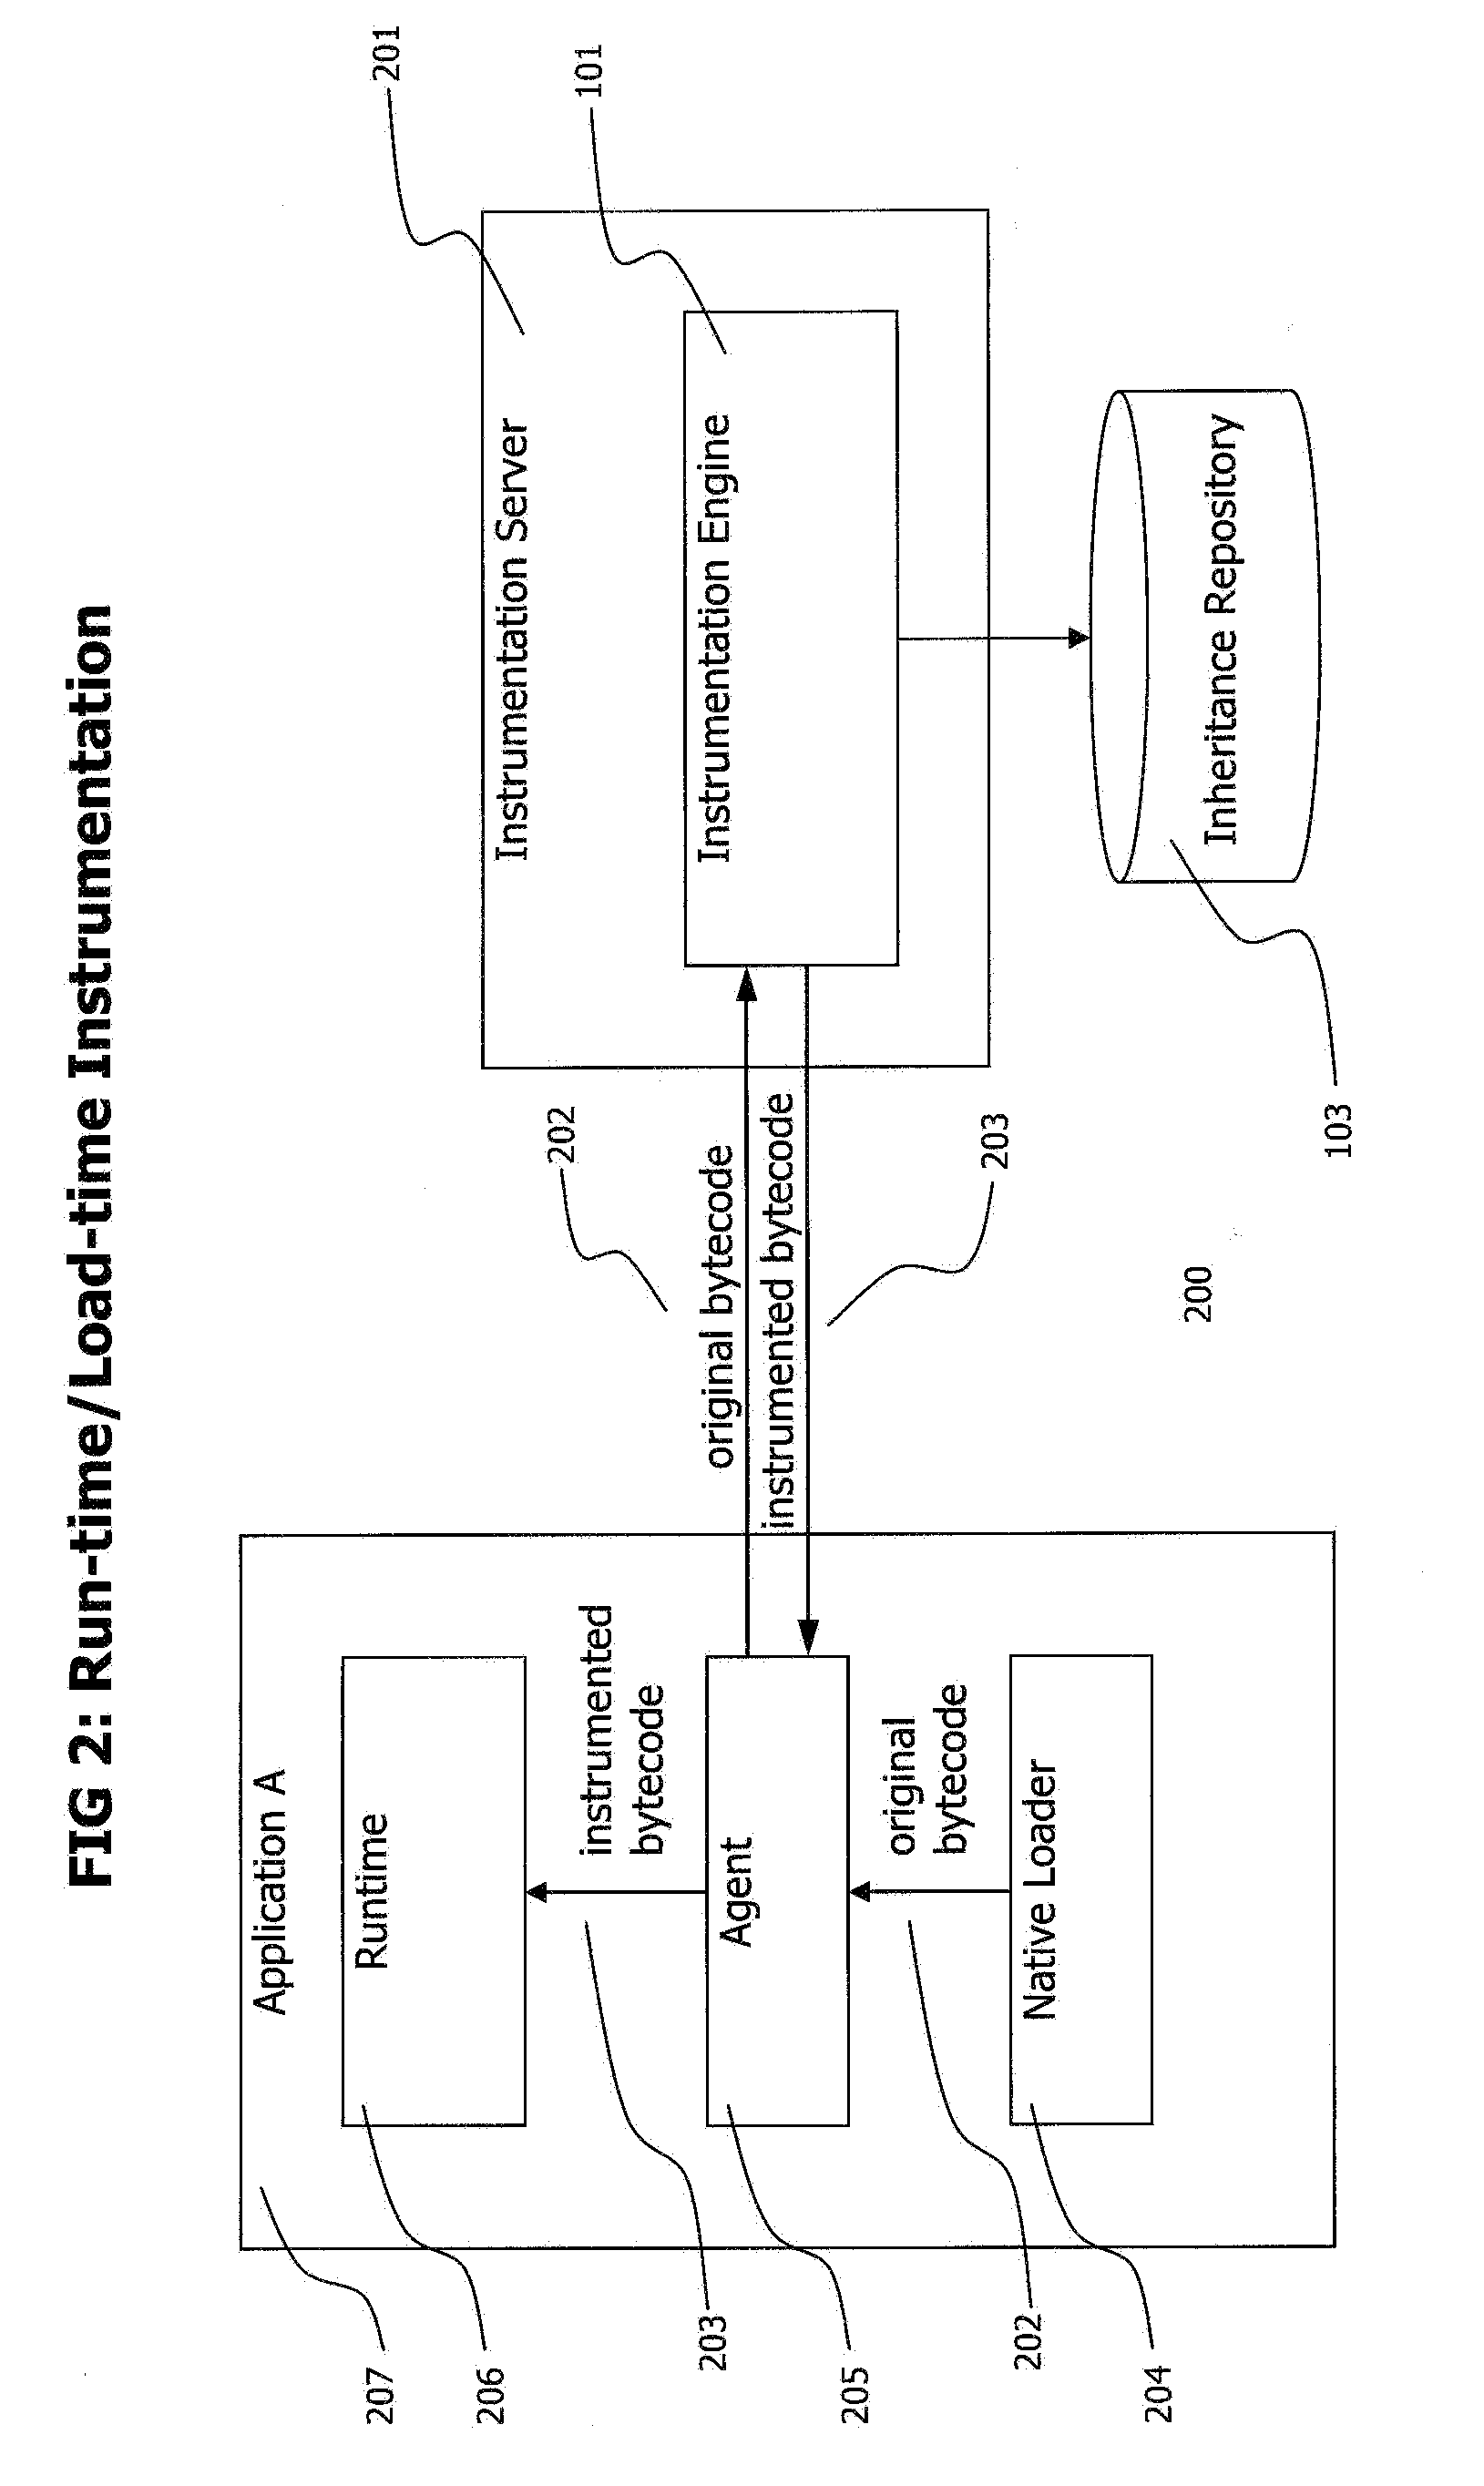 Method and system for adaptive, generic code instrumentation using run-time or load-time generated inheritance information for diagnosis and monitoring application performance and failure